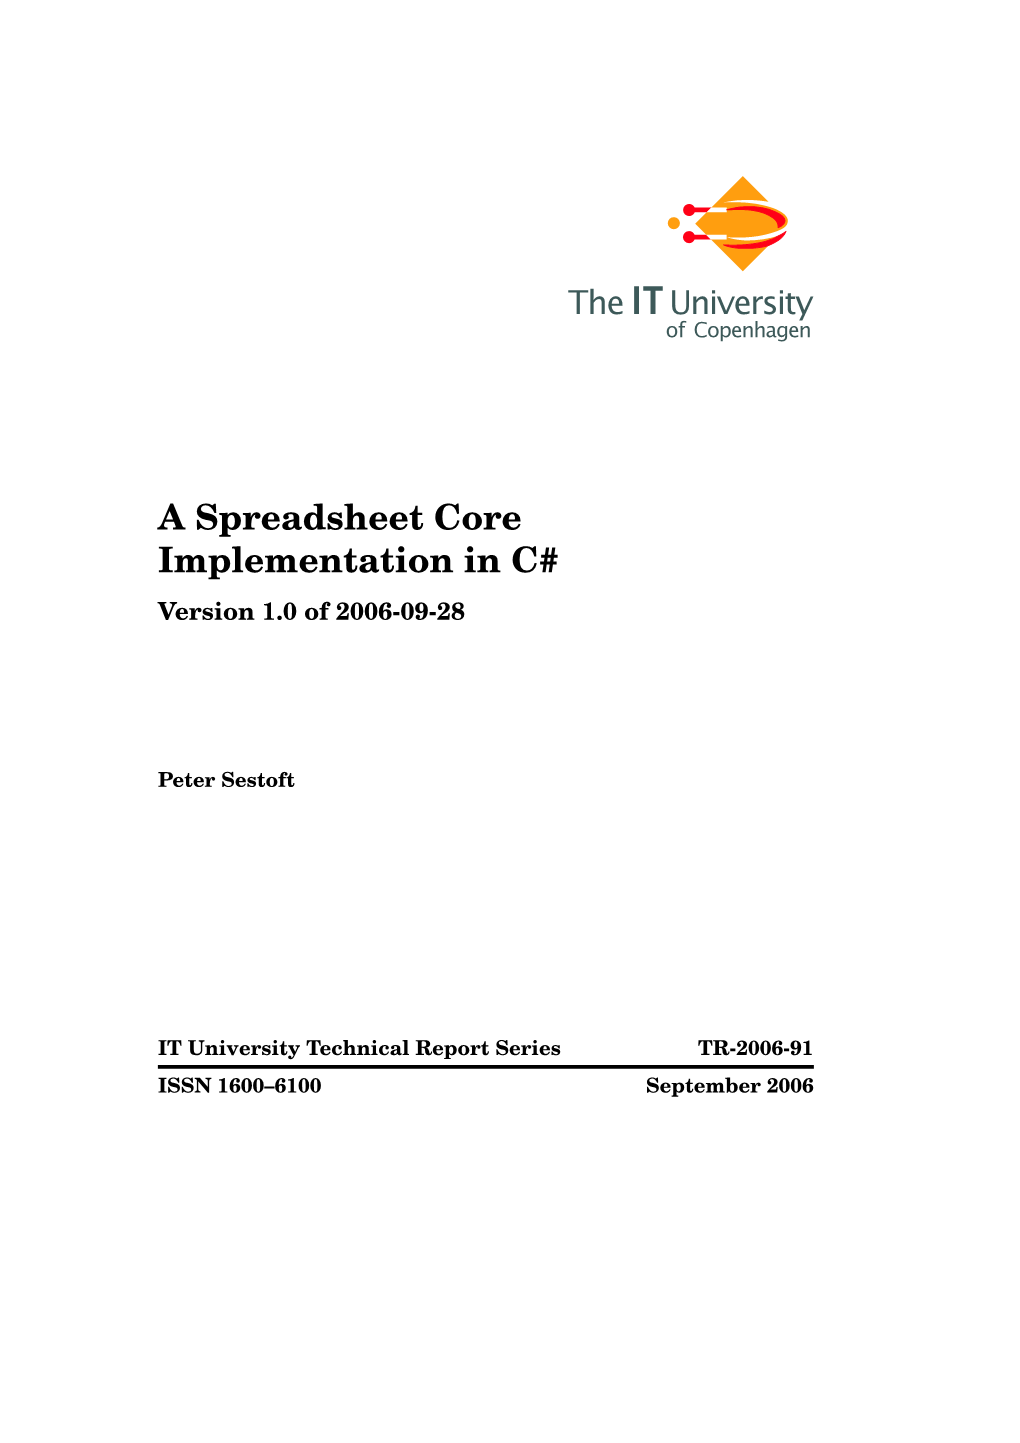 A Spreadsheet Core Implementation in C# Version 1.0 of 2006-09-28